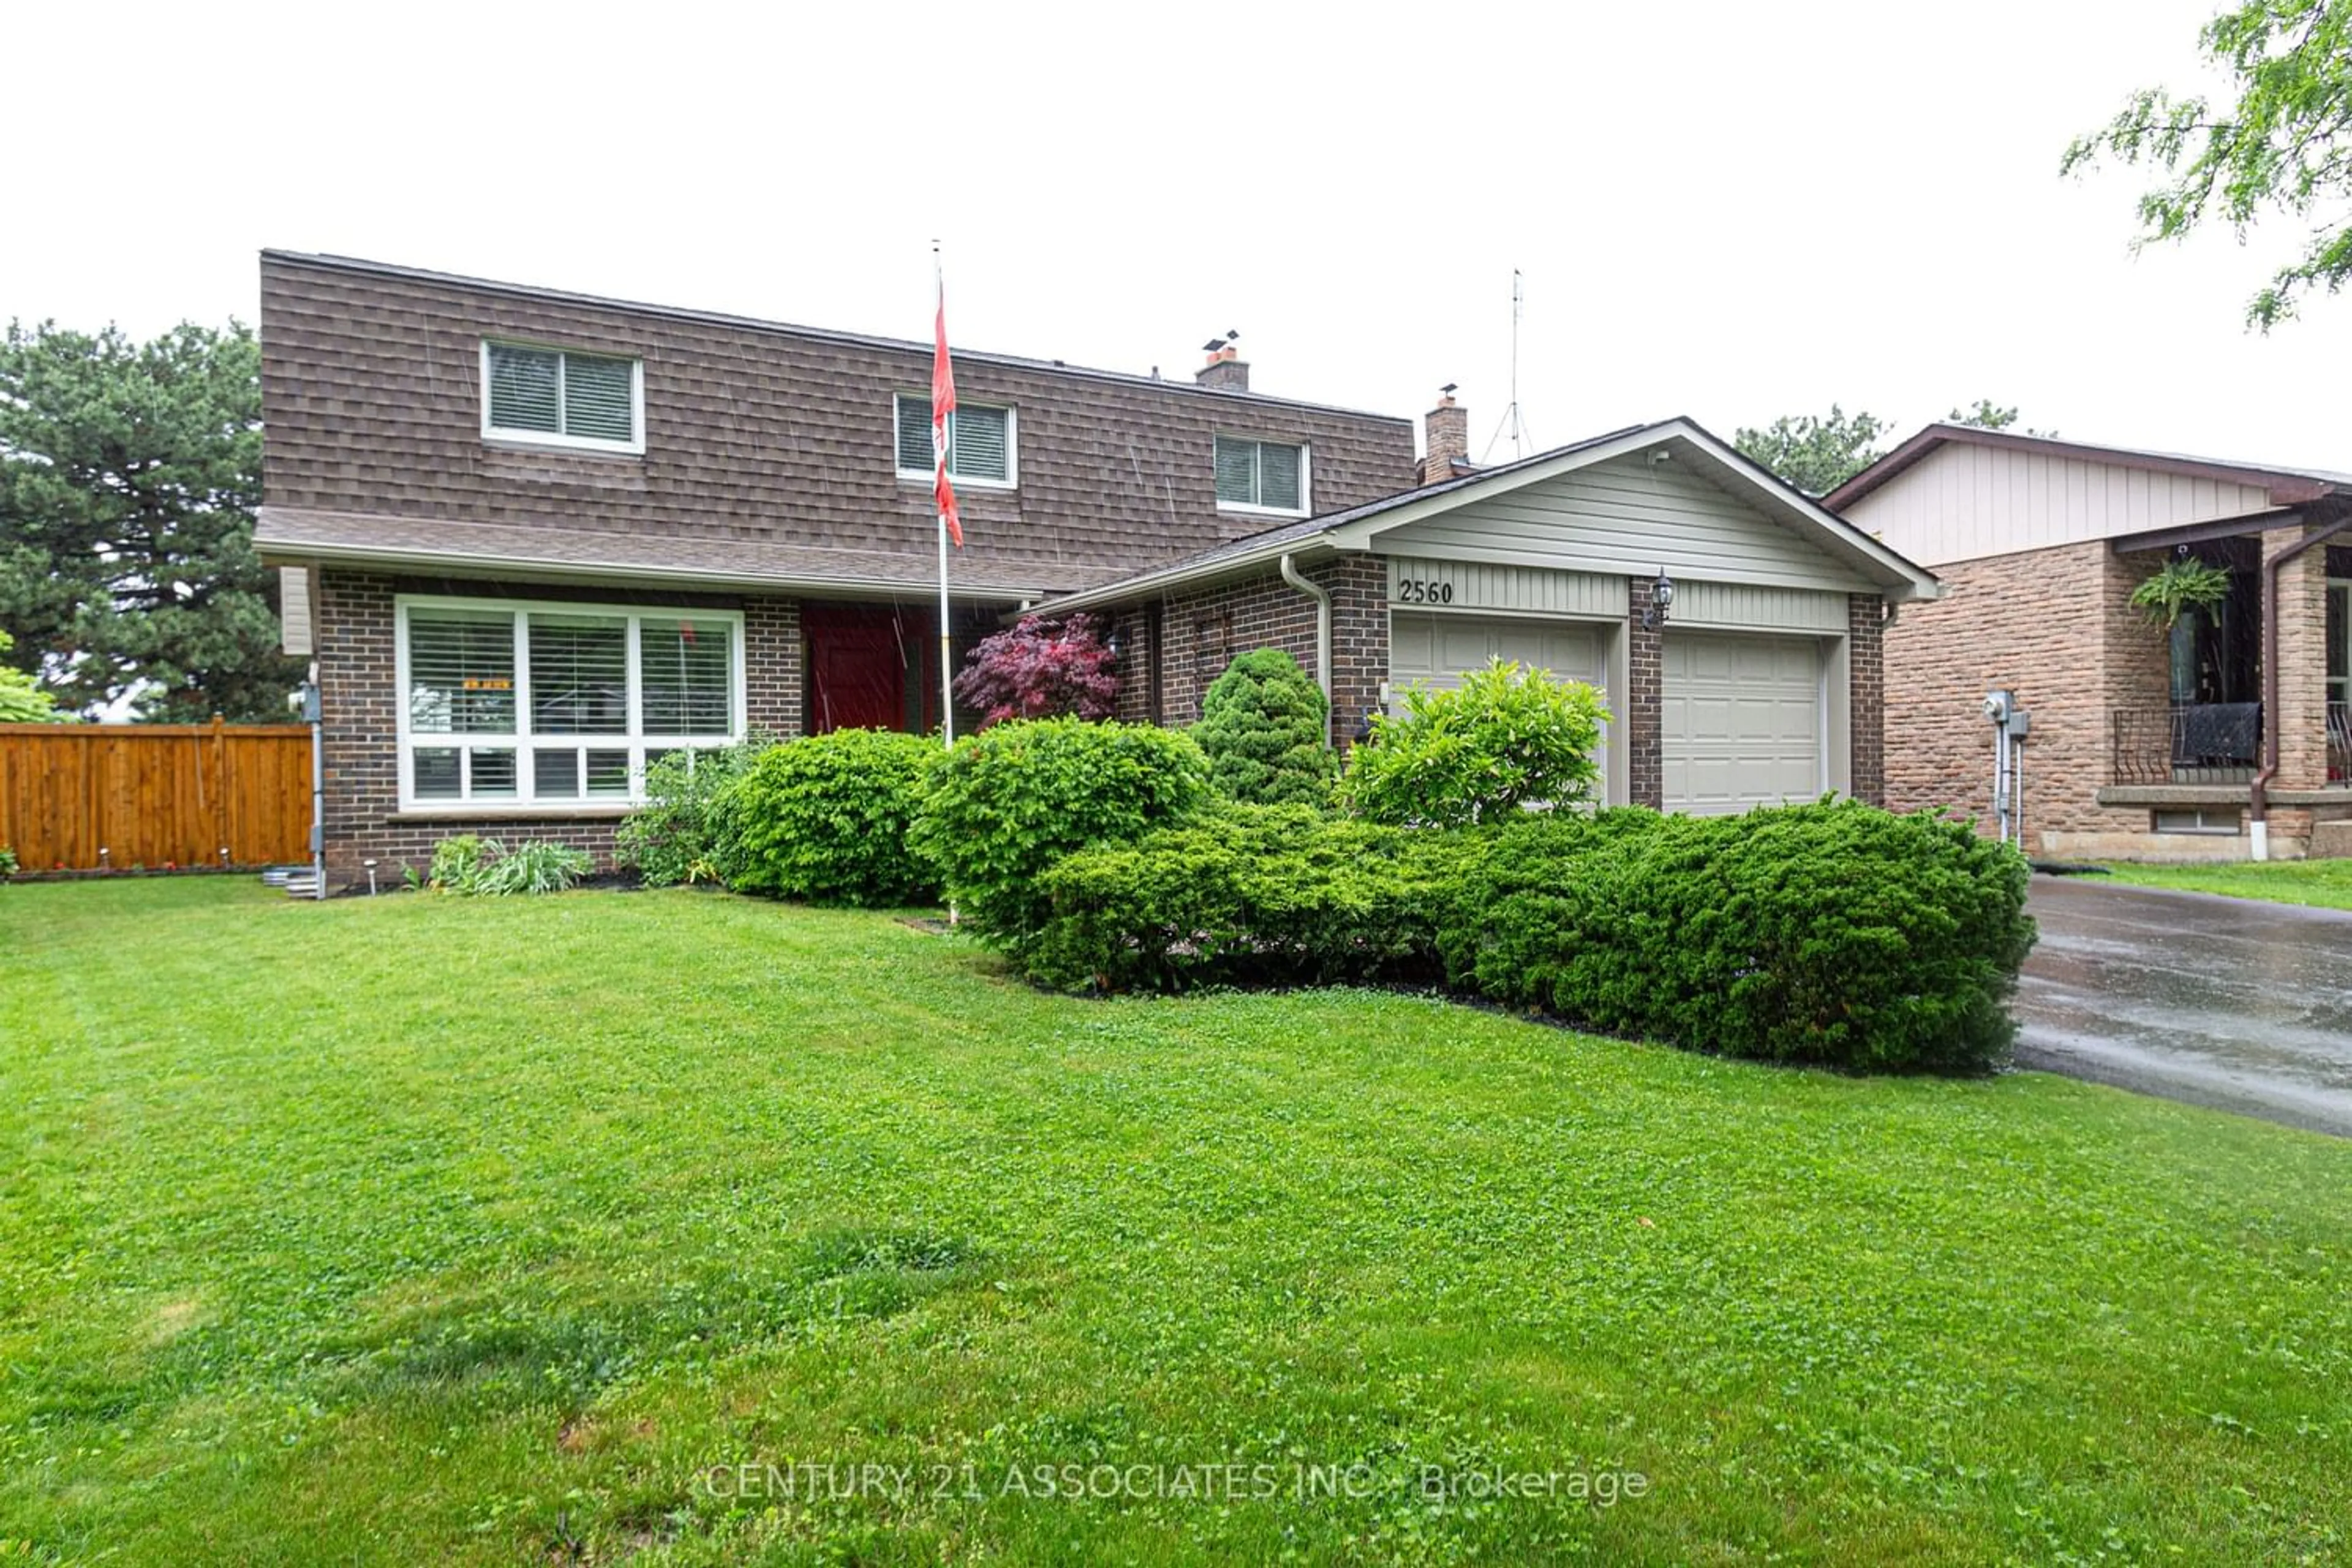 Frontside or backside of a home for 2560 Brasilia Circ, Mississauga Ontario L5N 2G1